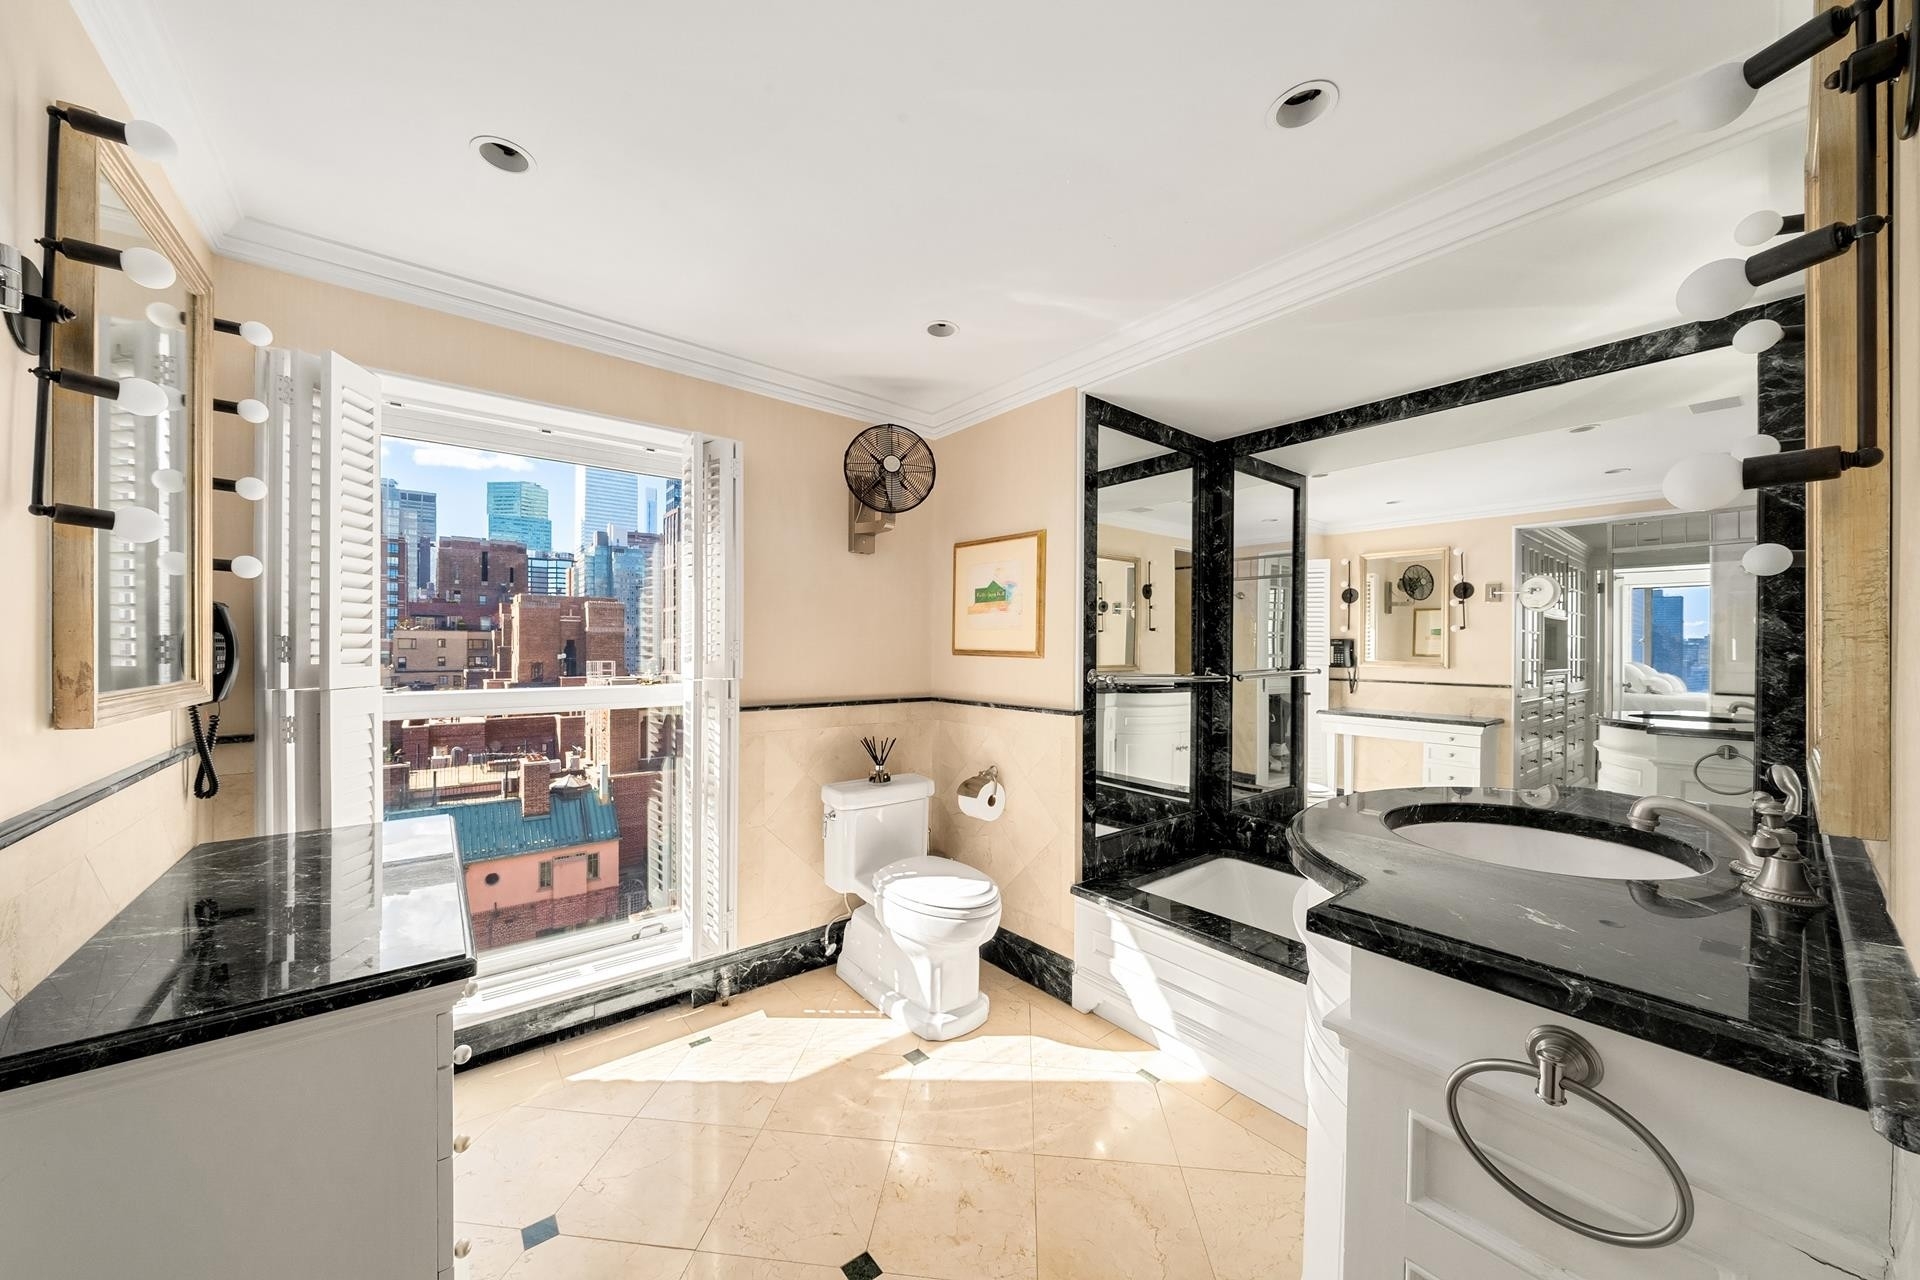 13. Co-op Properties for Sale at The Campanile, 450 E 52ND ST, 15 Beekman, New York, NY 10022